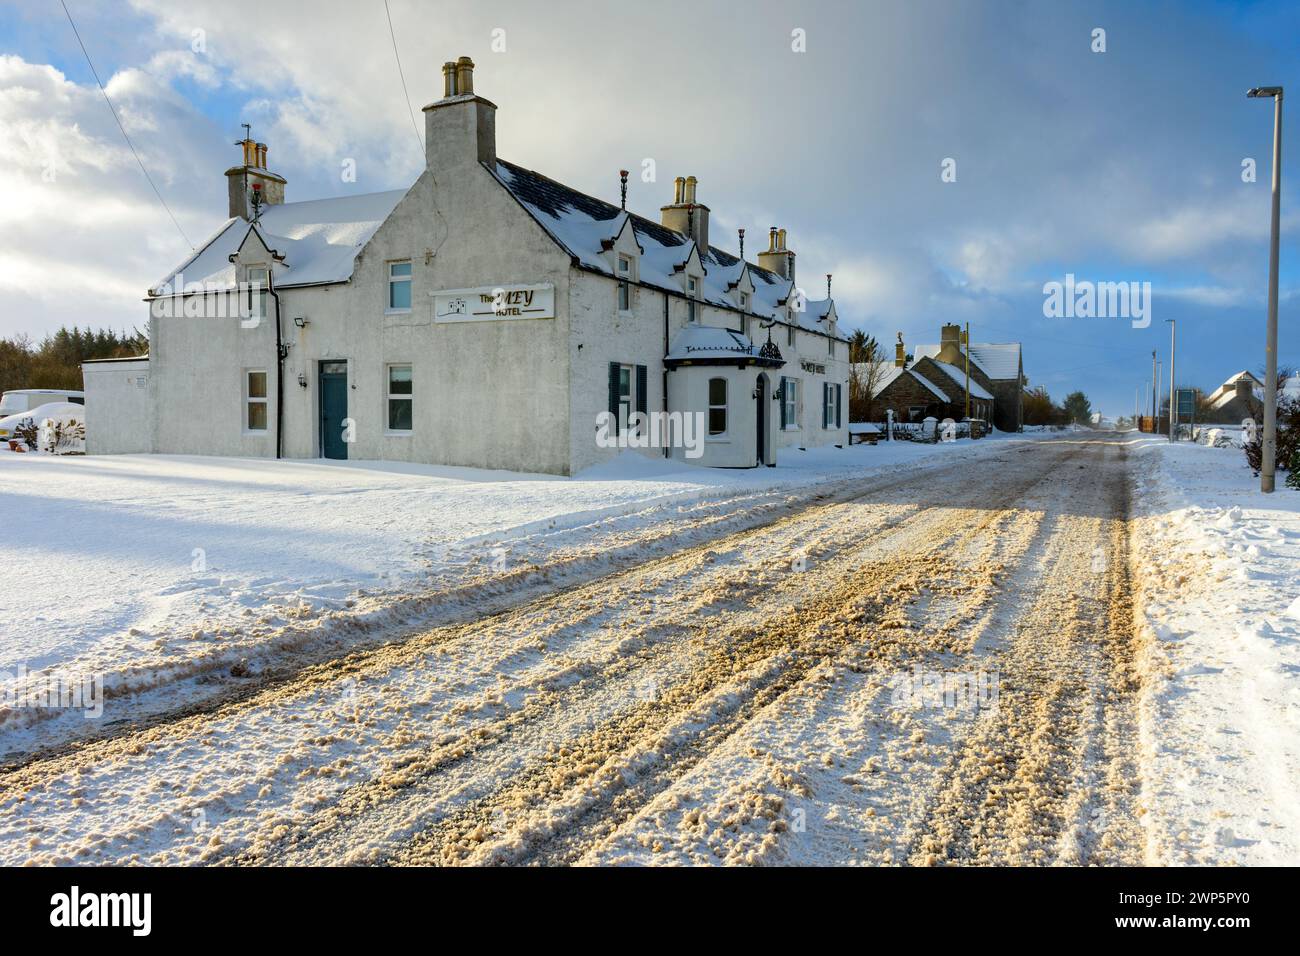 The Mey Hotel on the A836 trunk road after a heavy snowfall, at the village of Mey, Caithness, Scotland, UK Stock Photo